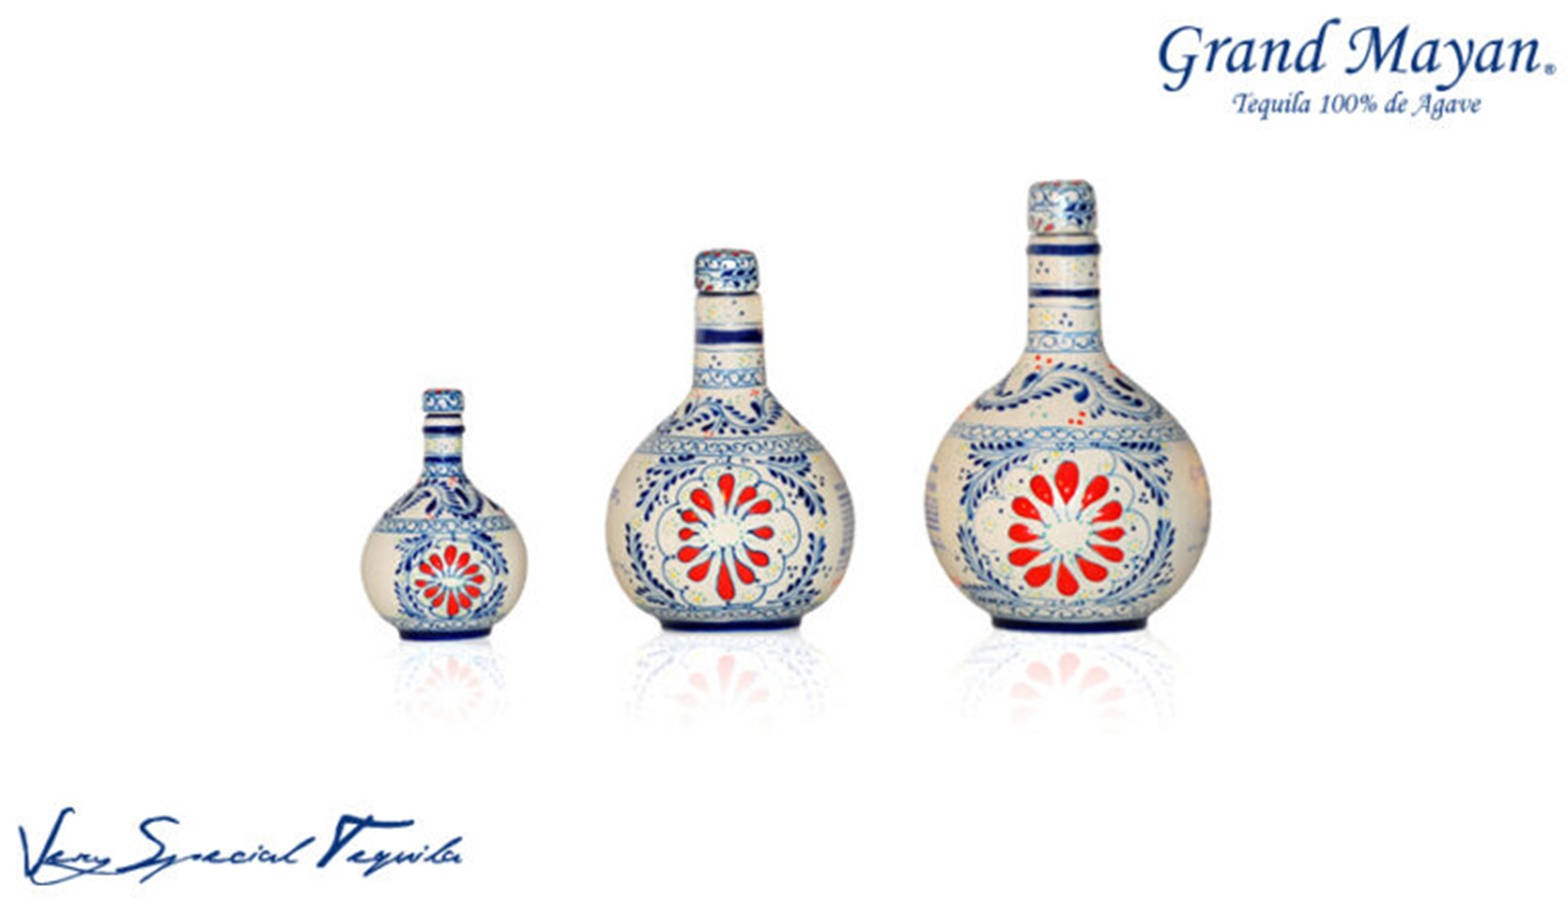 Grand Mayan Silver Tequila Ultra Aged Sizes Photography Picture